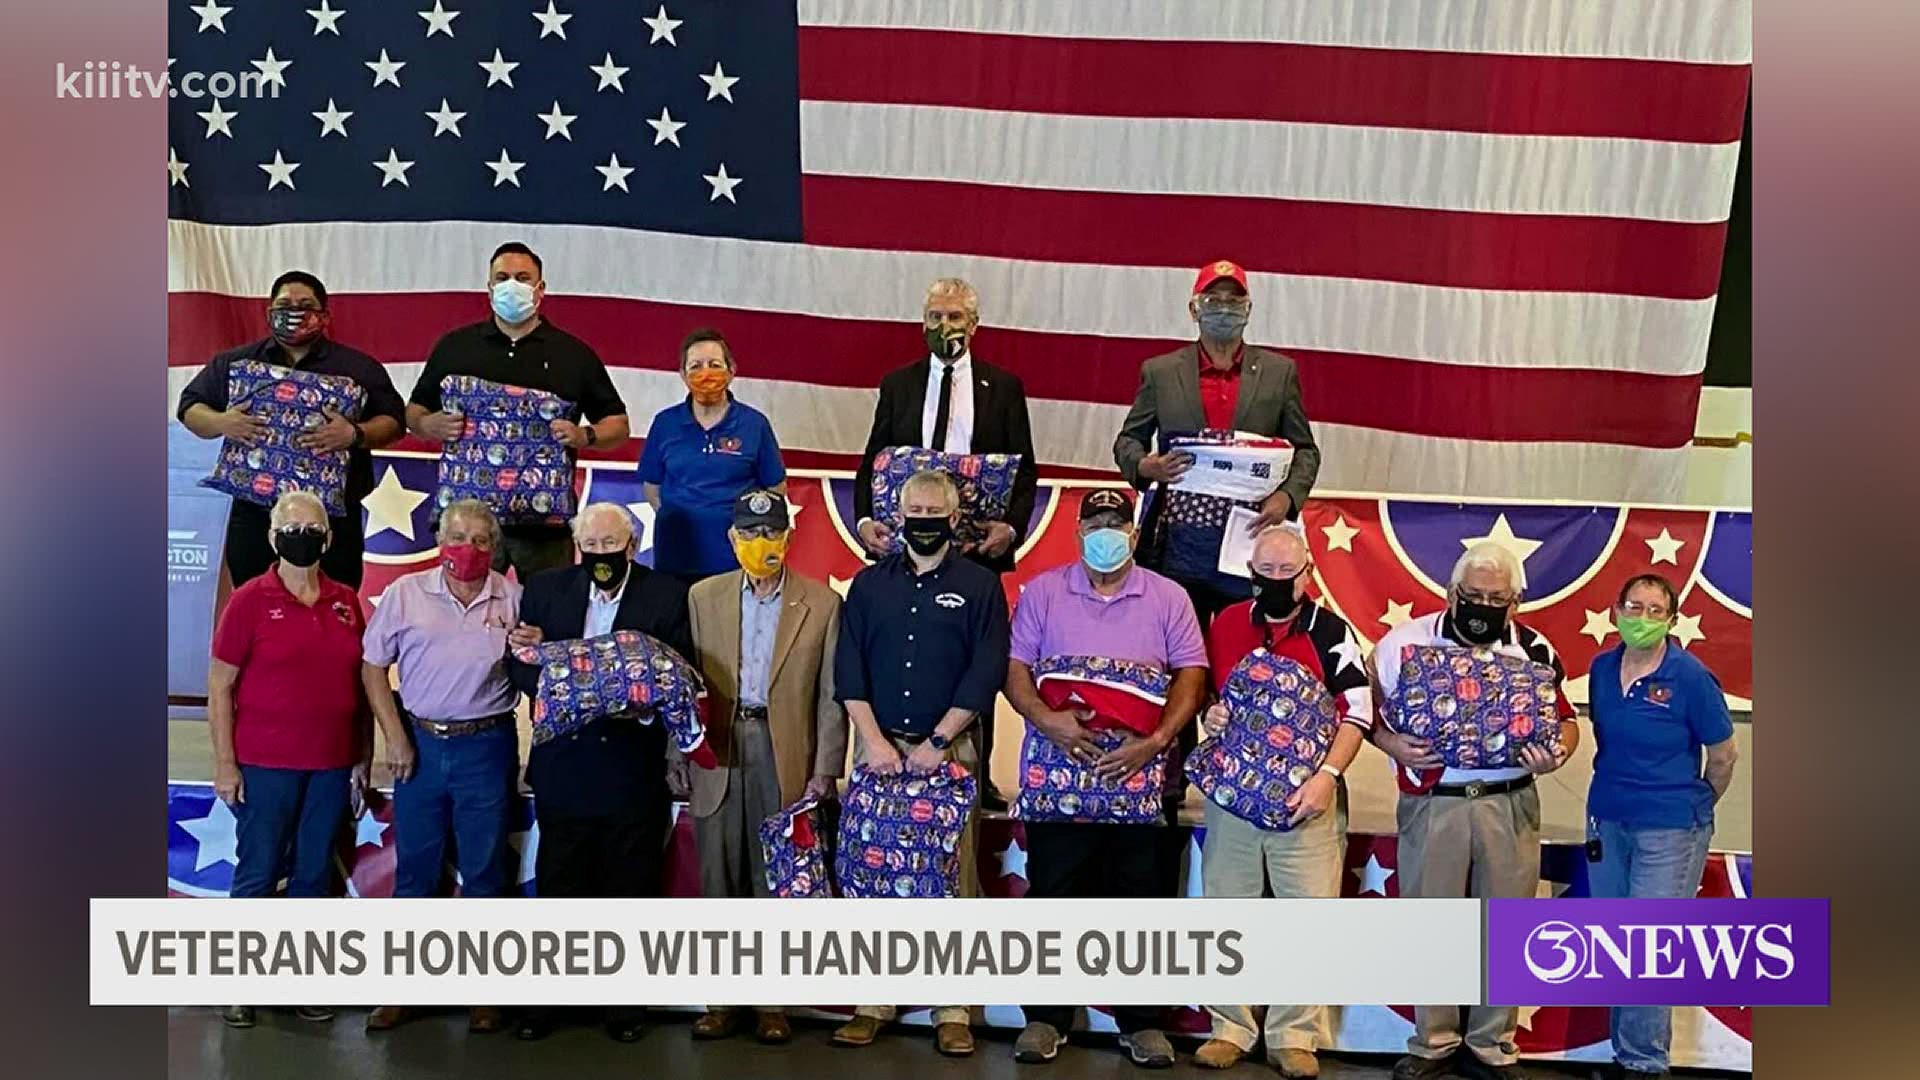 The USS Lexington hosted 12 veterans who were selected to receive the ‘Quilt of Honor’